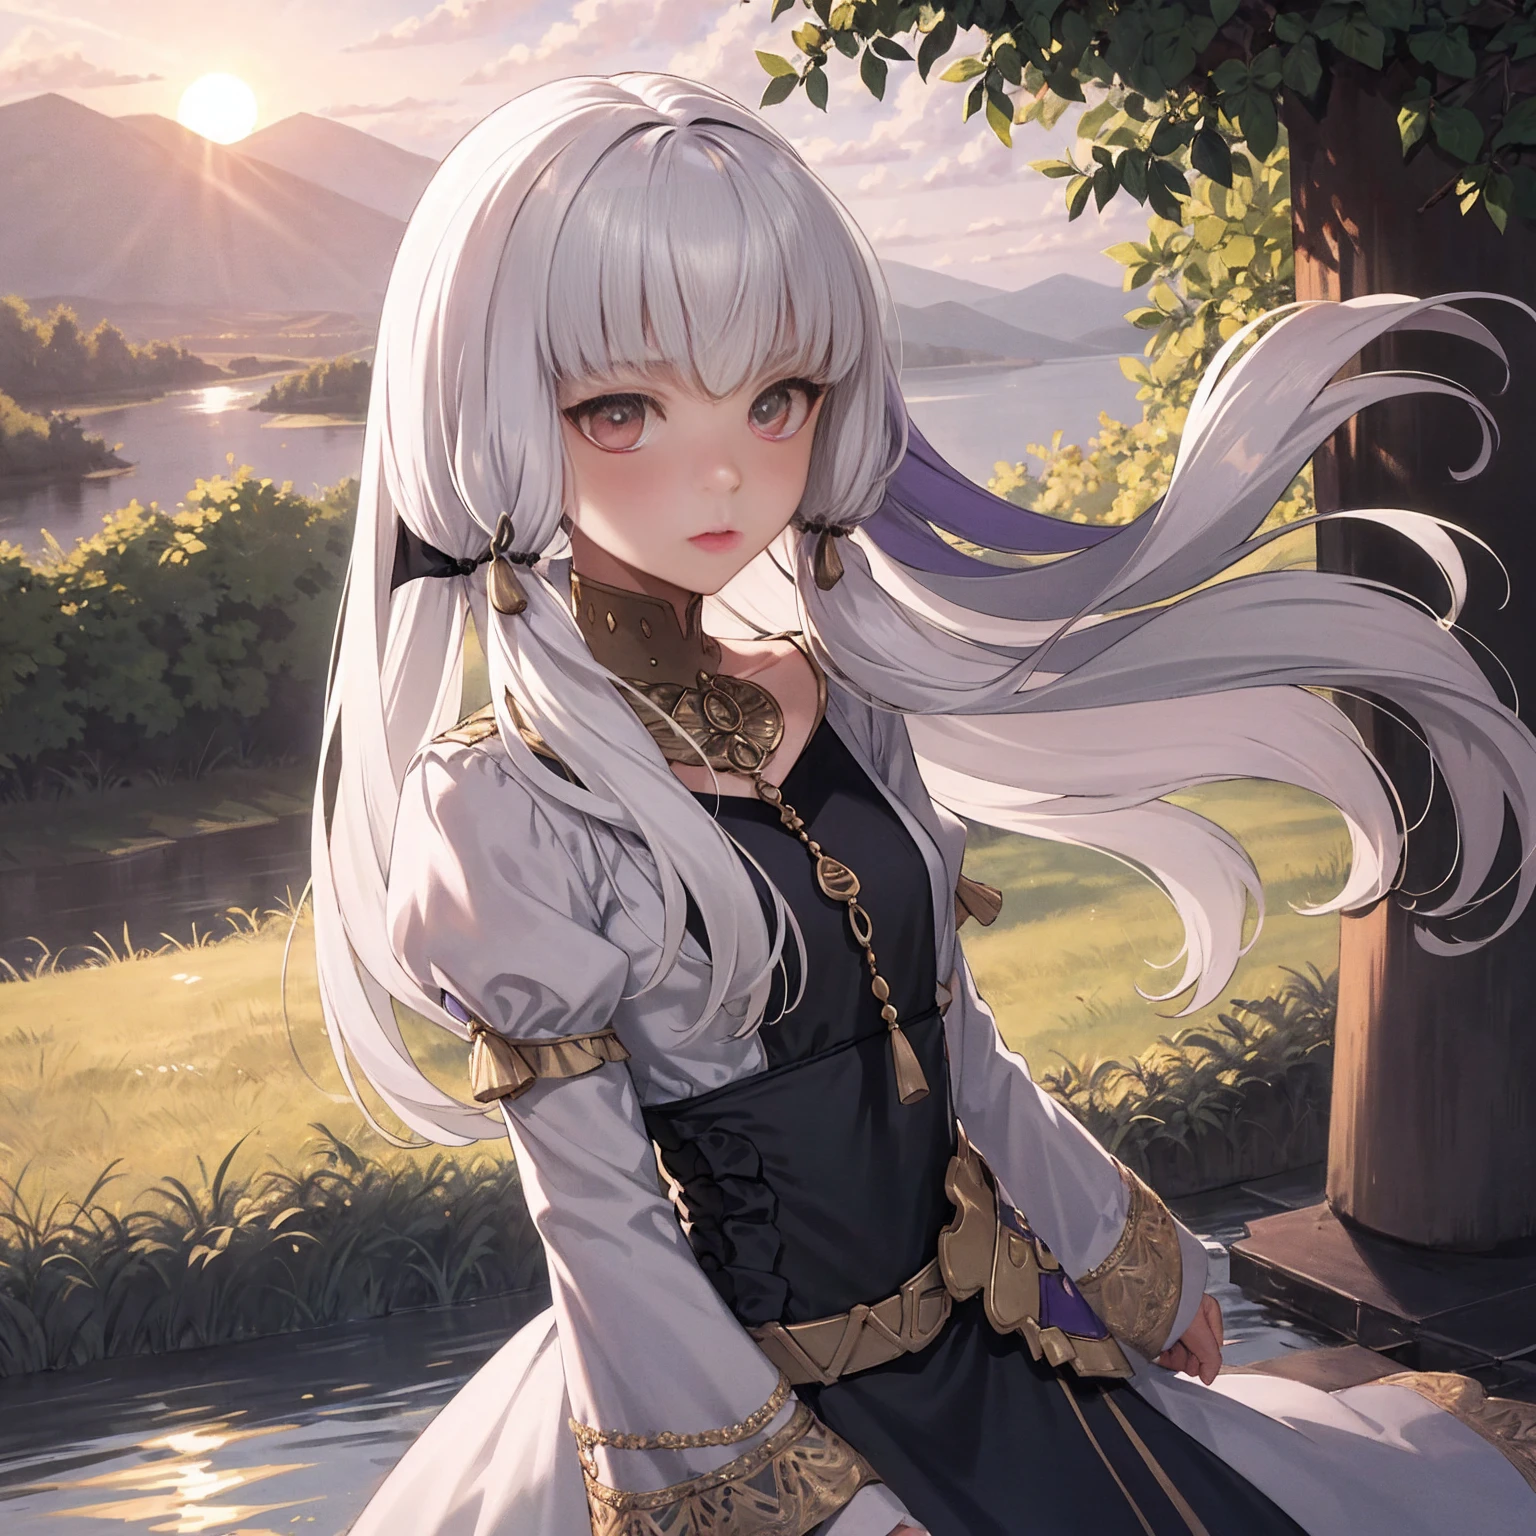 Lysithea von Ordelia is depicted in this artwork as a serene and captivating figure. She is portrayed as a young girl with long, straight hair and mesmerizing eyes. Her hair is styled in low twintails, giving her a unique appearance. The artwork is presented in a monochrome greyscale, with the exception of a few elements. Lysithea is shown in an upper body shot, wearing a flowing dress that adds to her poised posture. Her porcelain skin is accentuated by a subtle blush, giving her a delicate and ethereal look. She is adorned with a crystal pendant, which adds a touch of elegance to her overall appearance. The artwork takes place during the golden hour, as indicated by the warm tones, sun flare, and soft shadows. This lighting technique enhances the vibrant colors, creating a painterly effect that adds to the dreamy atmosphere of the piece. The scene is set against a scenic lake, with distant mountains and a willow tree. The calm water reflects the sunlit clouds, contributing to the peaceful ambiance and idyllic sunset. The level of detail in this official art is remarkable, with every element meticulously rendered. The artwork is presented in unity 8k wallpaper resolution, allowing viewers to appreciate the intricate details. Additionally, the zentangle and mandala elements add a touch of complexity to the overall composition.